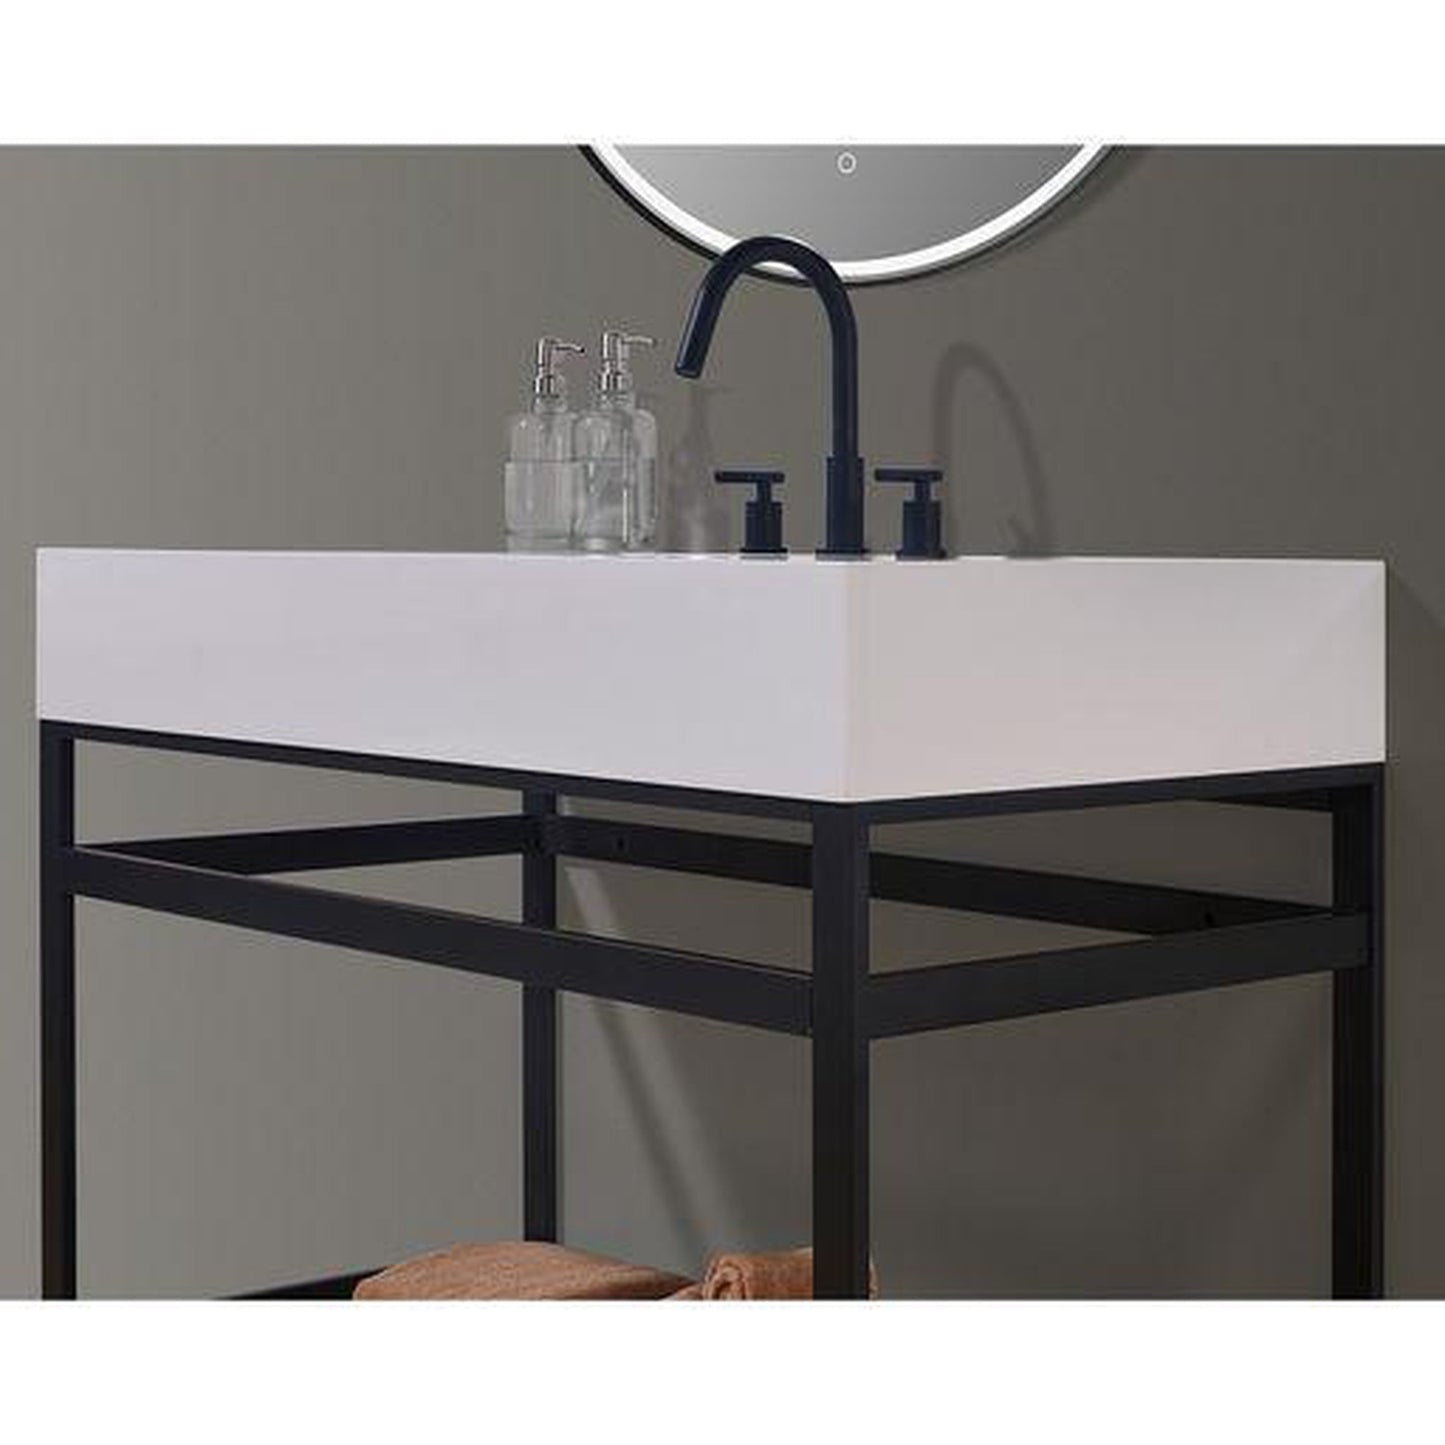 Altair Edolo 42" Matte Black Single Stainless Steel Bathroom Vanity Set Console With Mirror, Snow White Stone Top, Single Rectangular Undermount Ceramic Sink, and Safety Overflow Hole